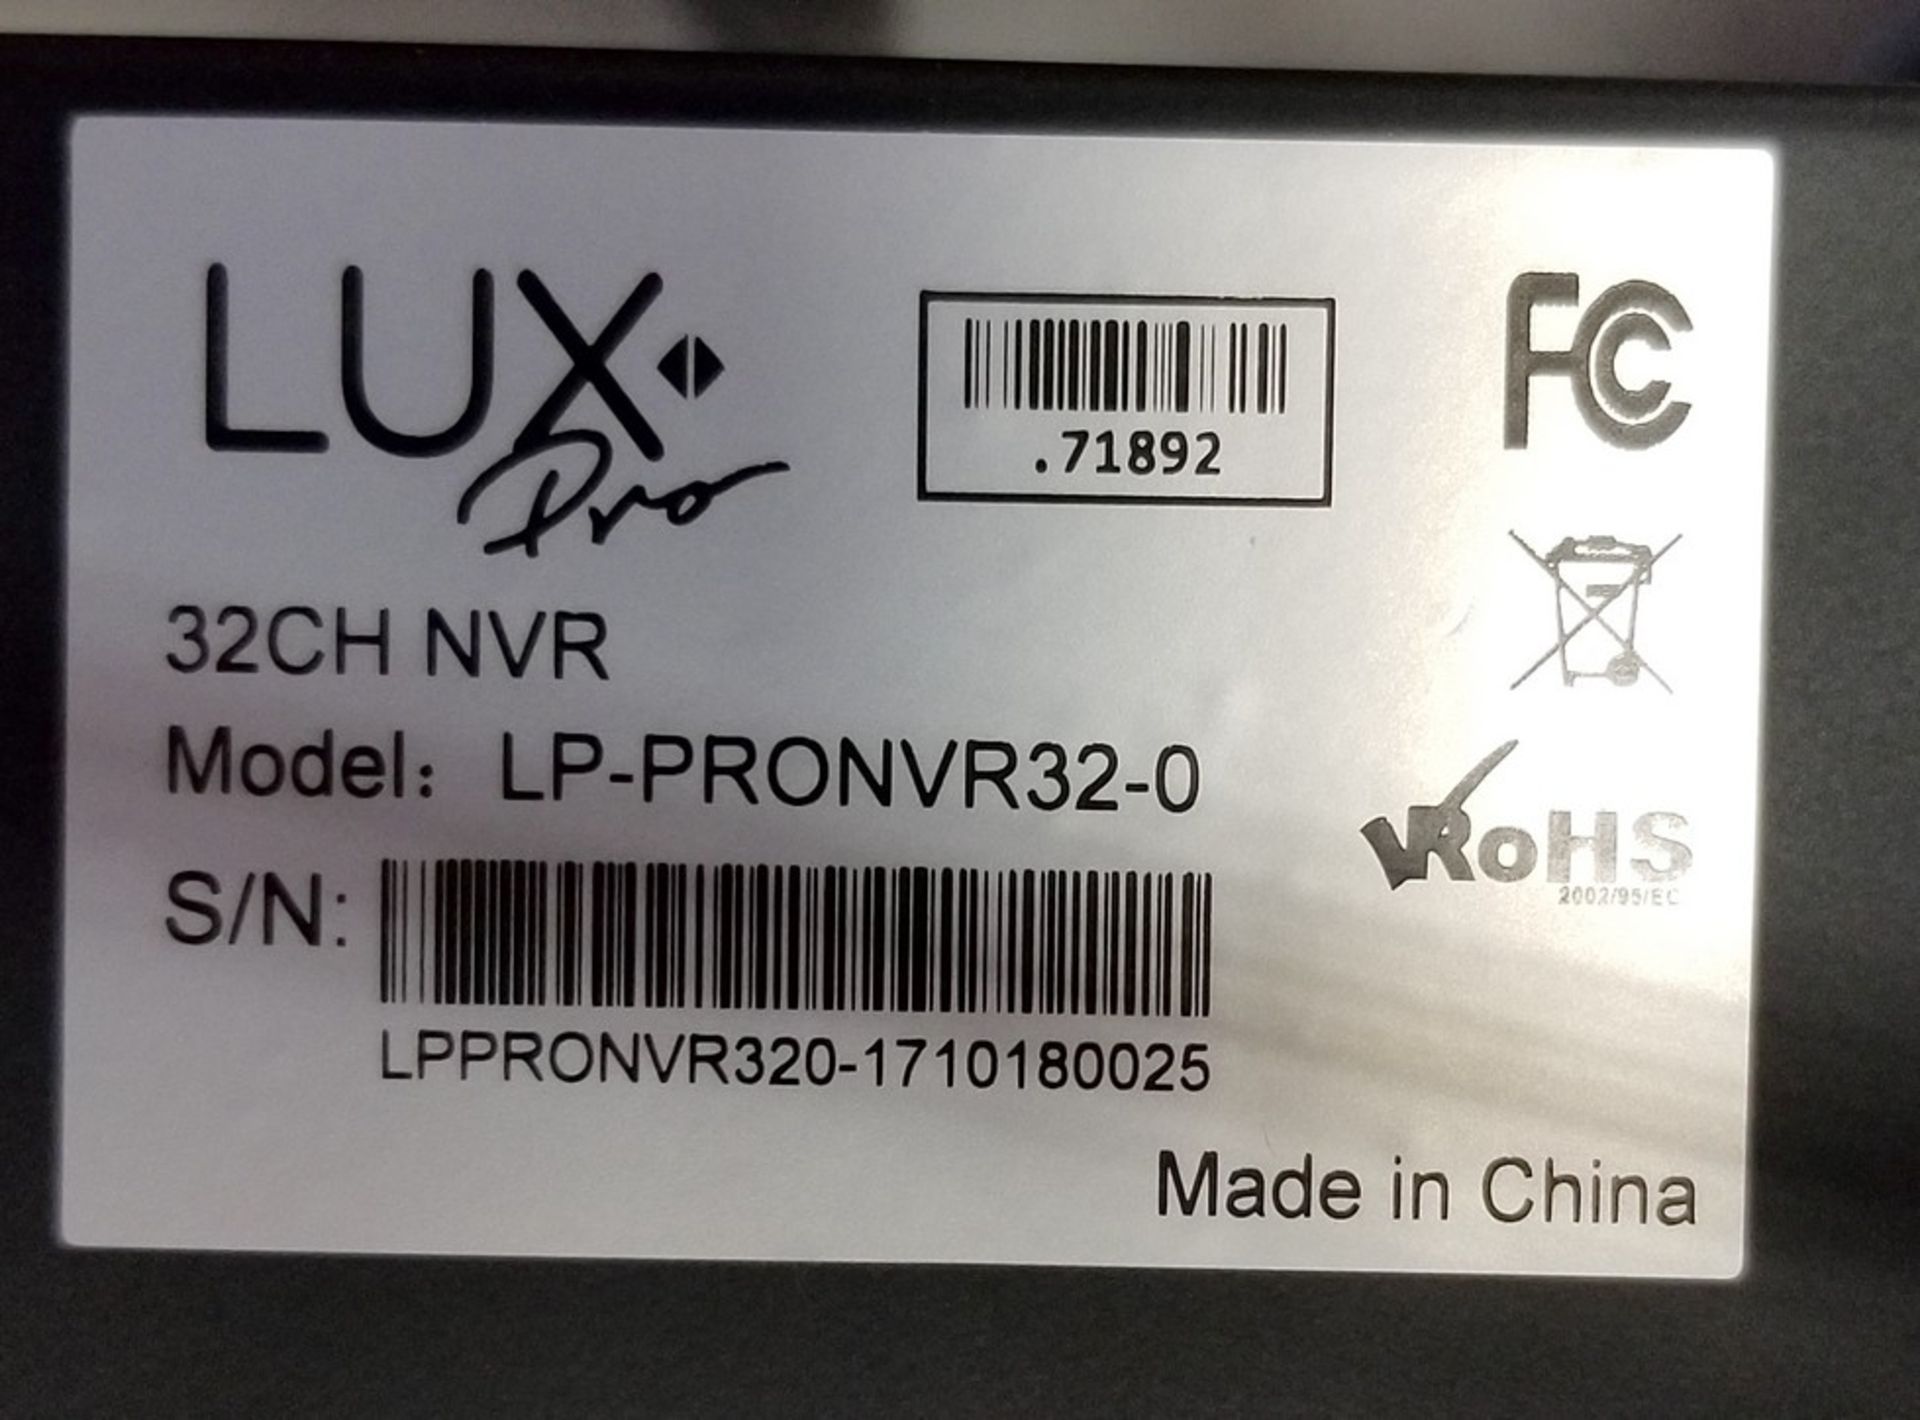 LUX, LP-PRONVR32-0 NETWORK VIDEO RECORDER - (NOB) COST $528 - Image 4 of 4